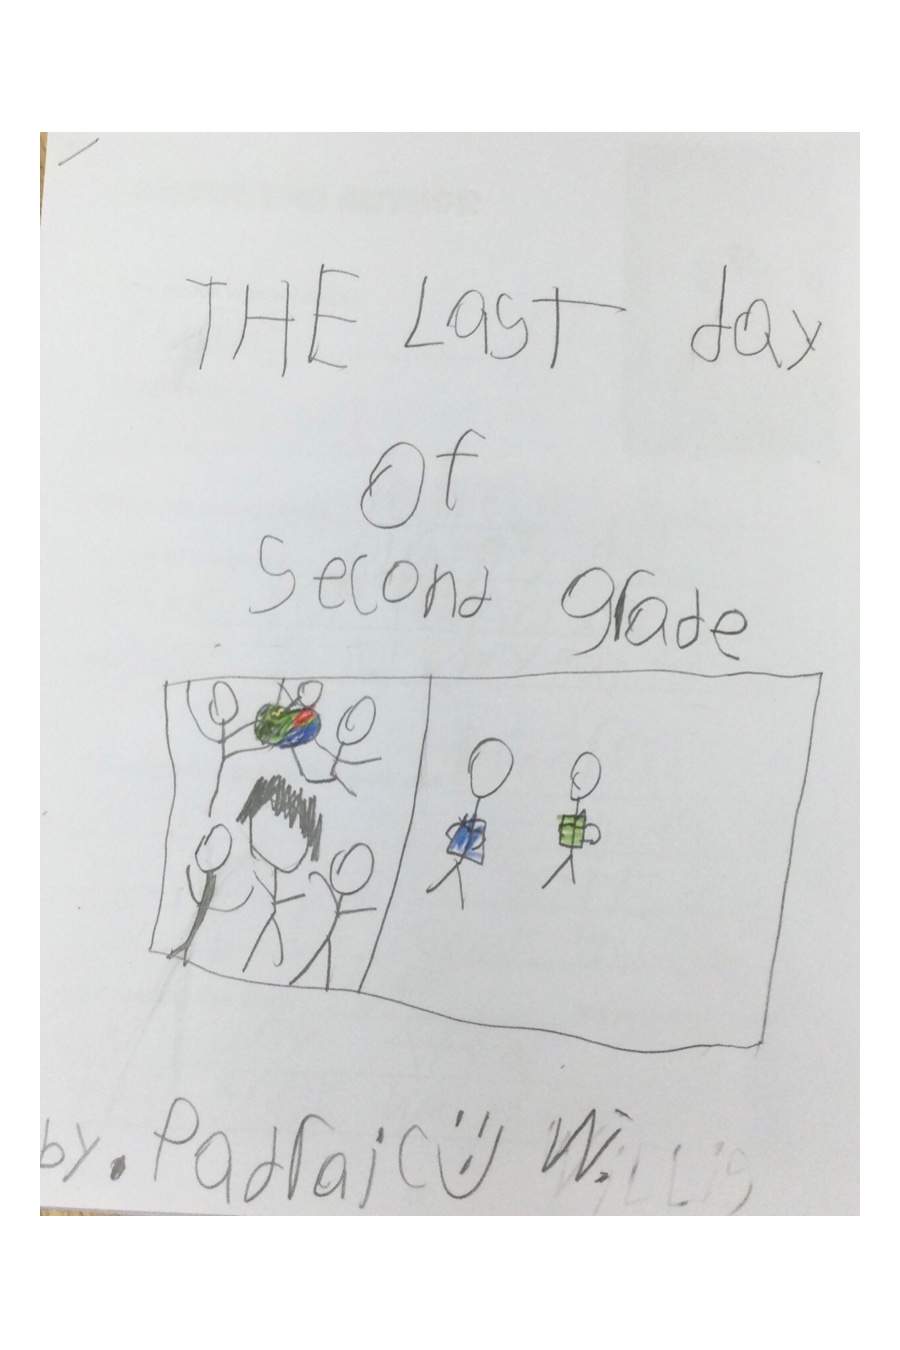 The Last Day of Second Grade by Padraic W